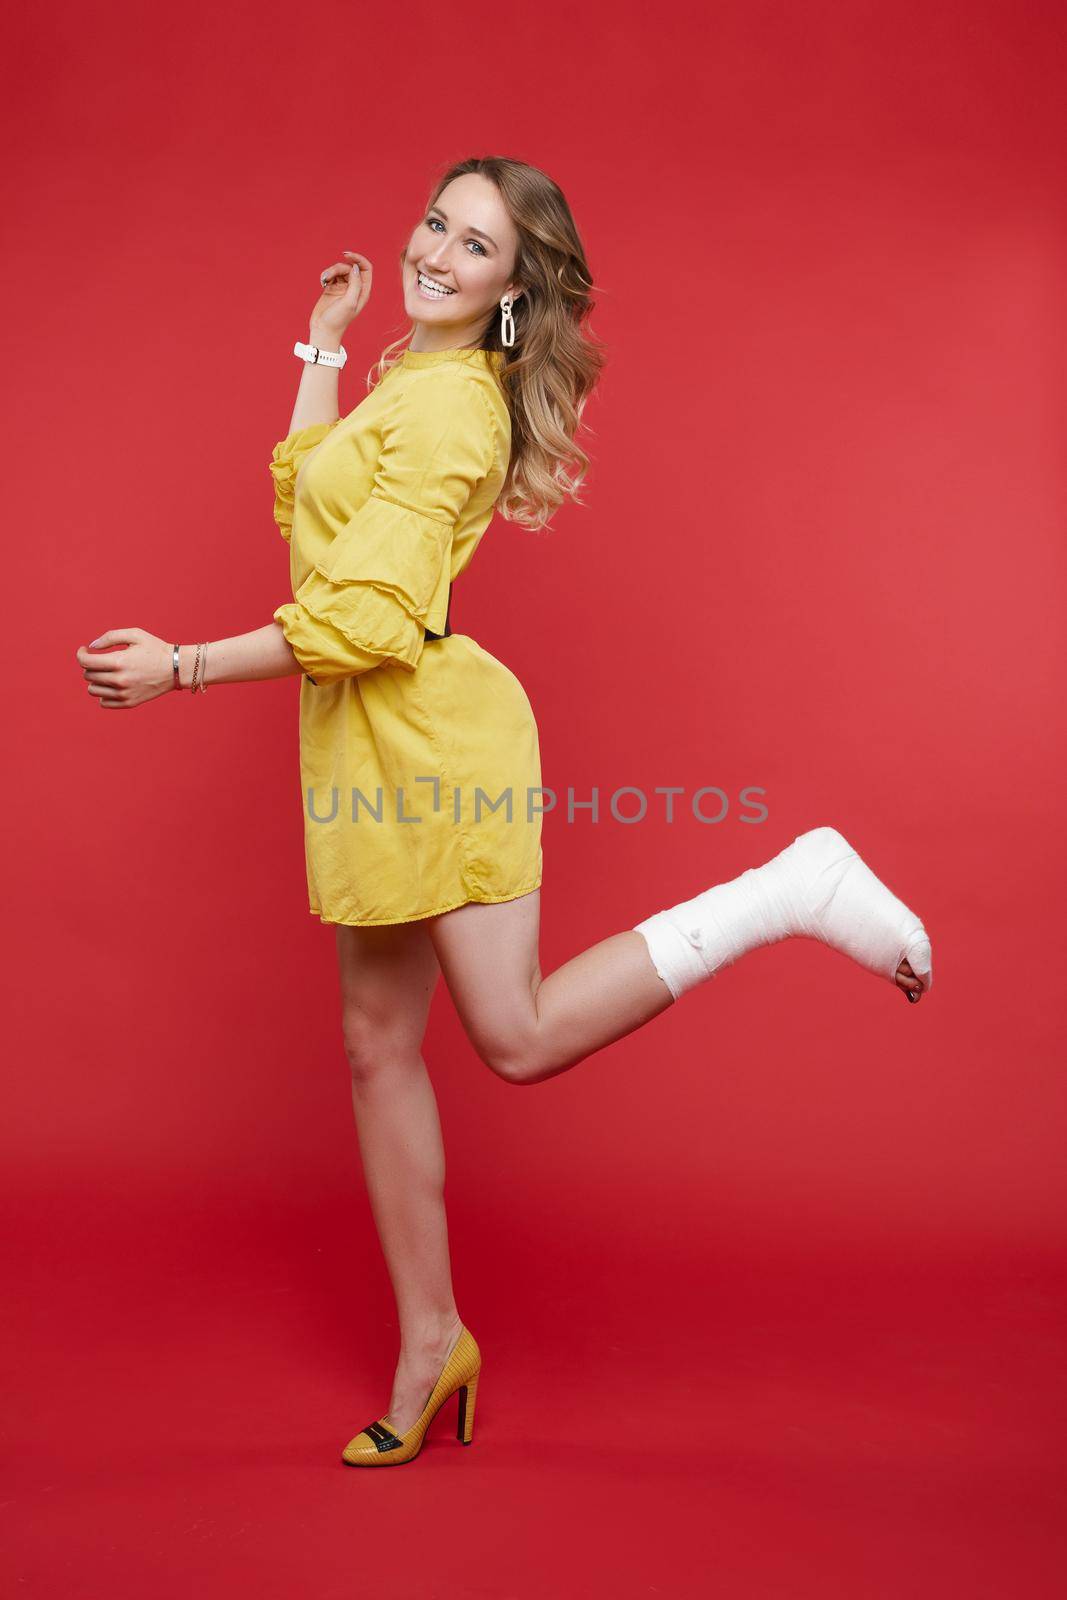 Full length portrait of stunning young woman in yellow dress with one leg in plaster. She is posing with bent broken leg in plaster showing positive attitude. Cheerful lady in dress with plaster. Isolate on red.